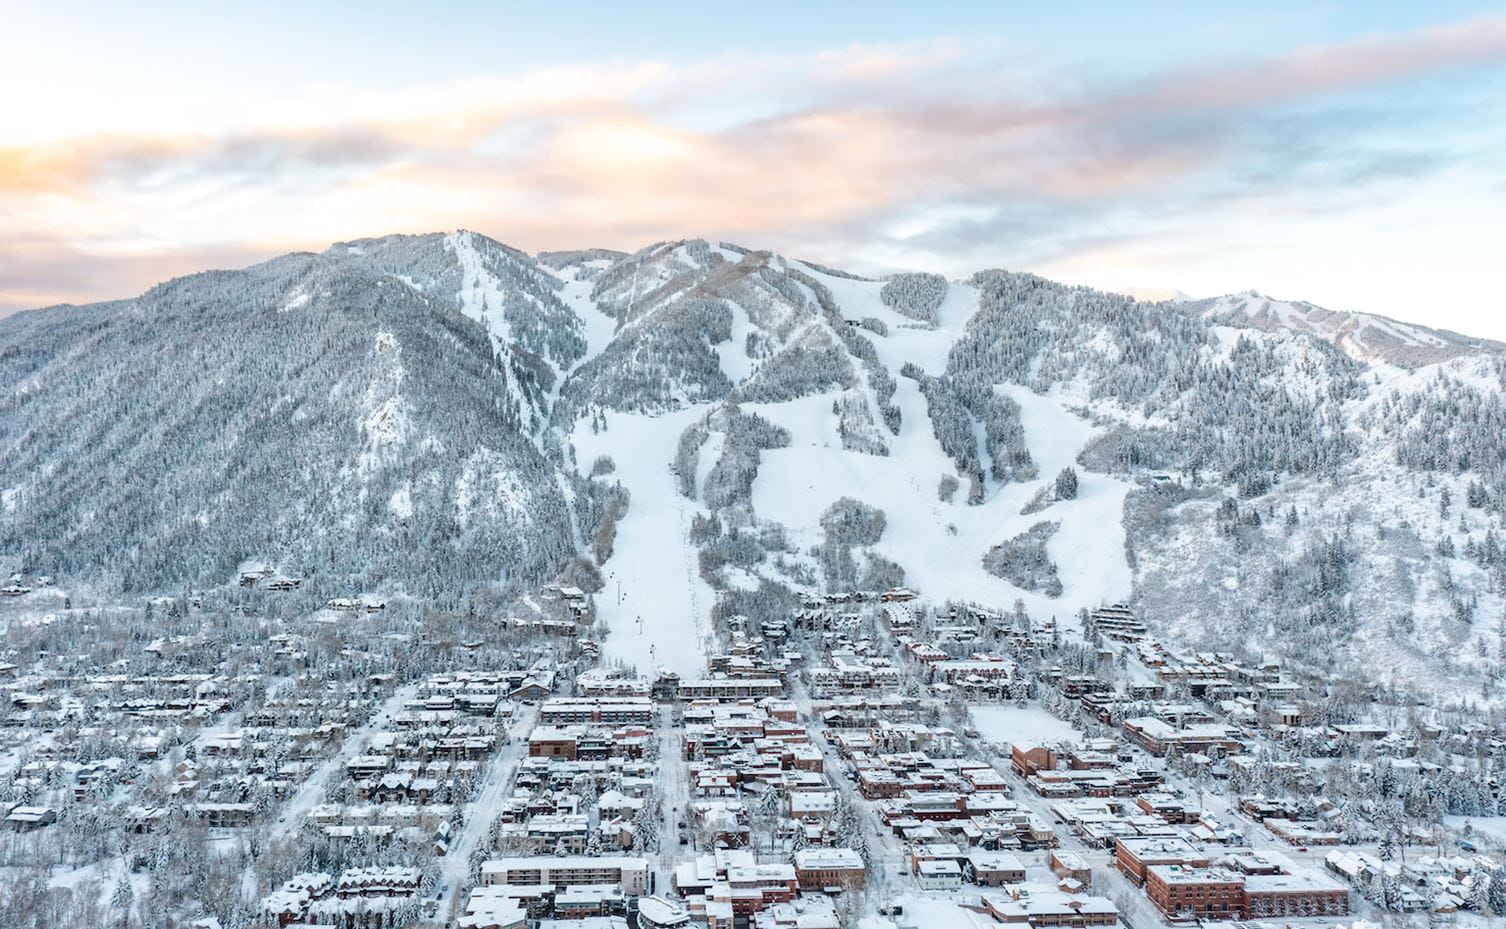 A Small Place with Big Ideas | Aspen Snowmass